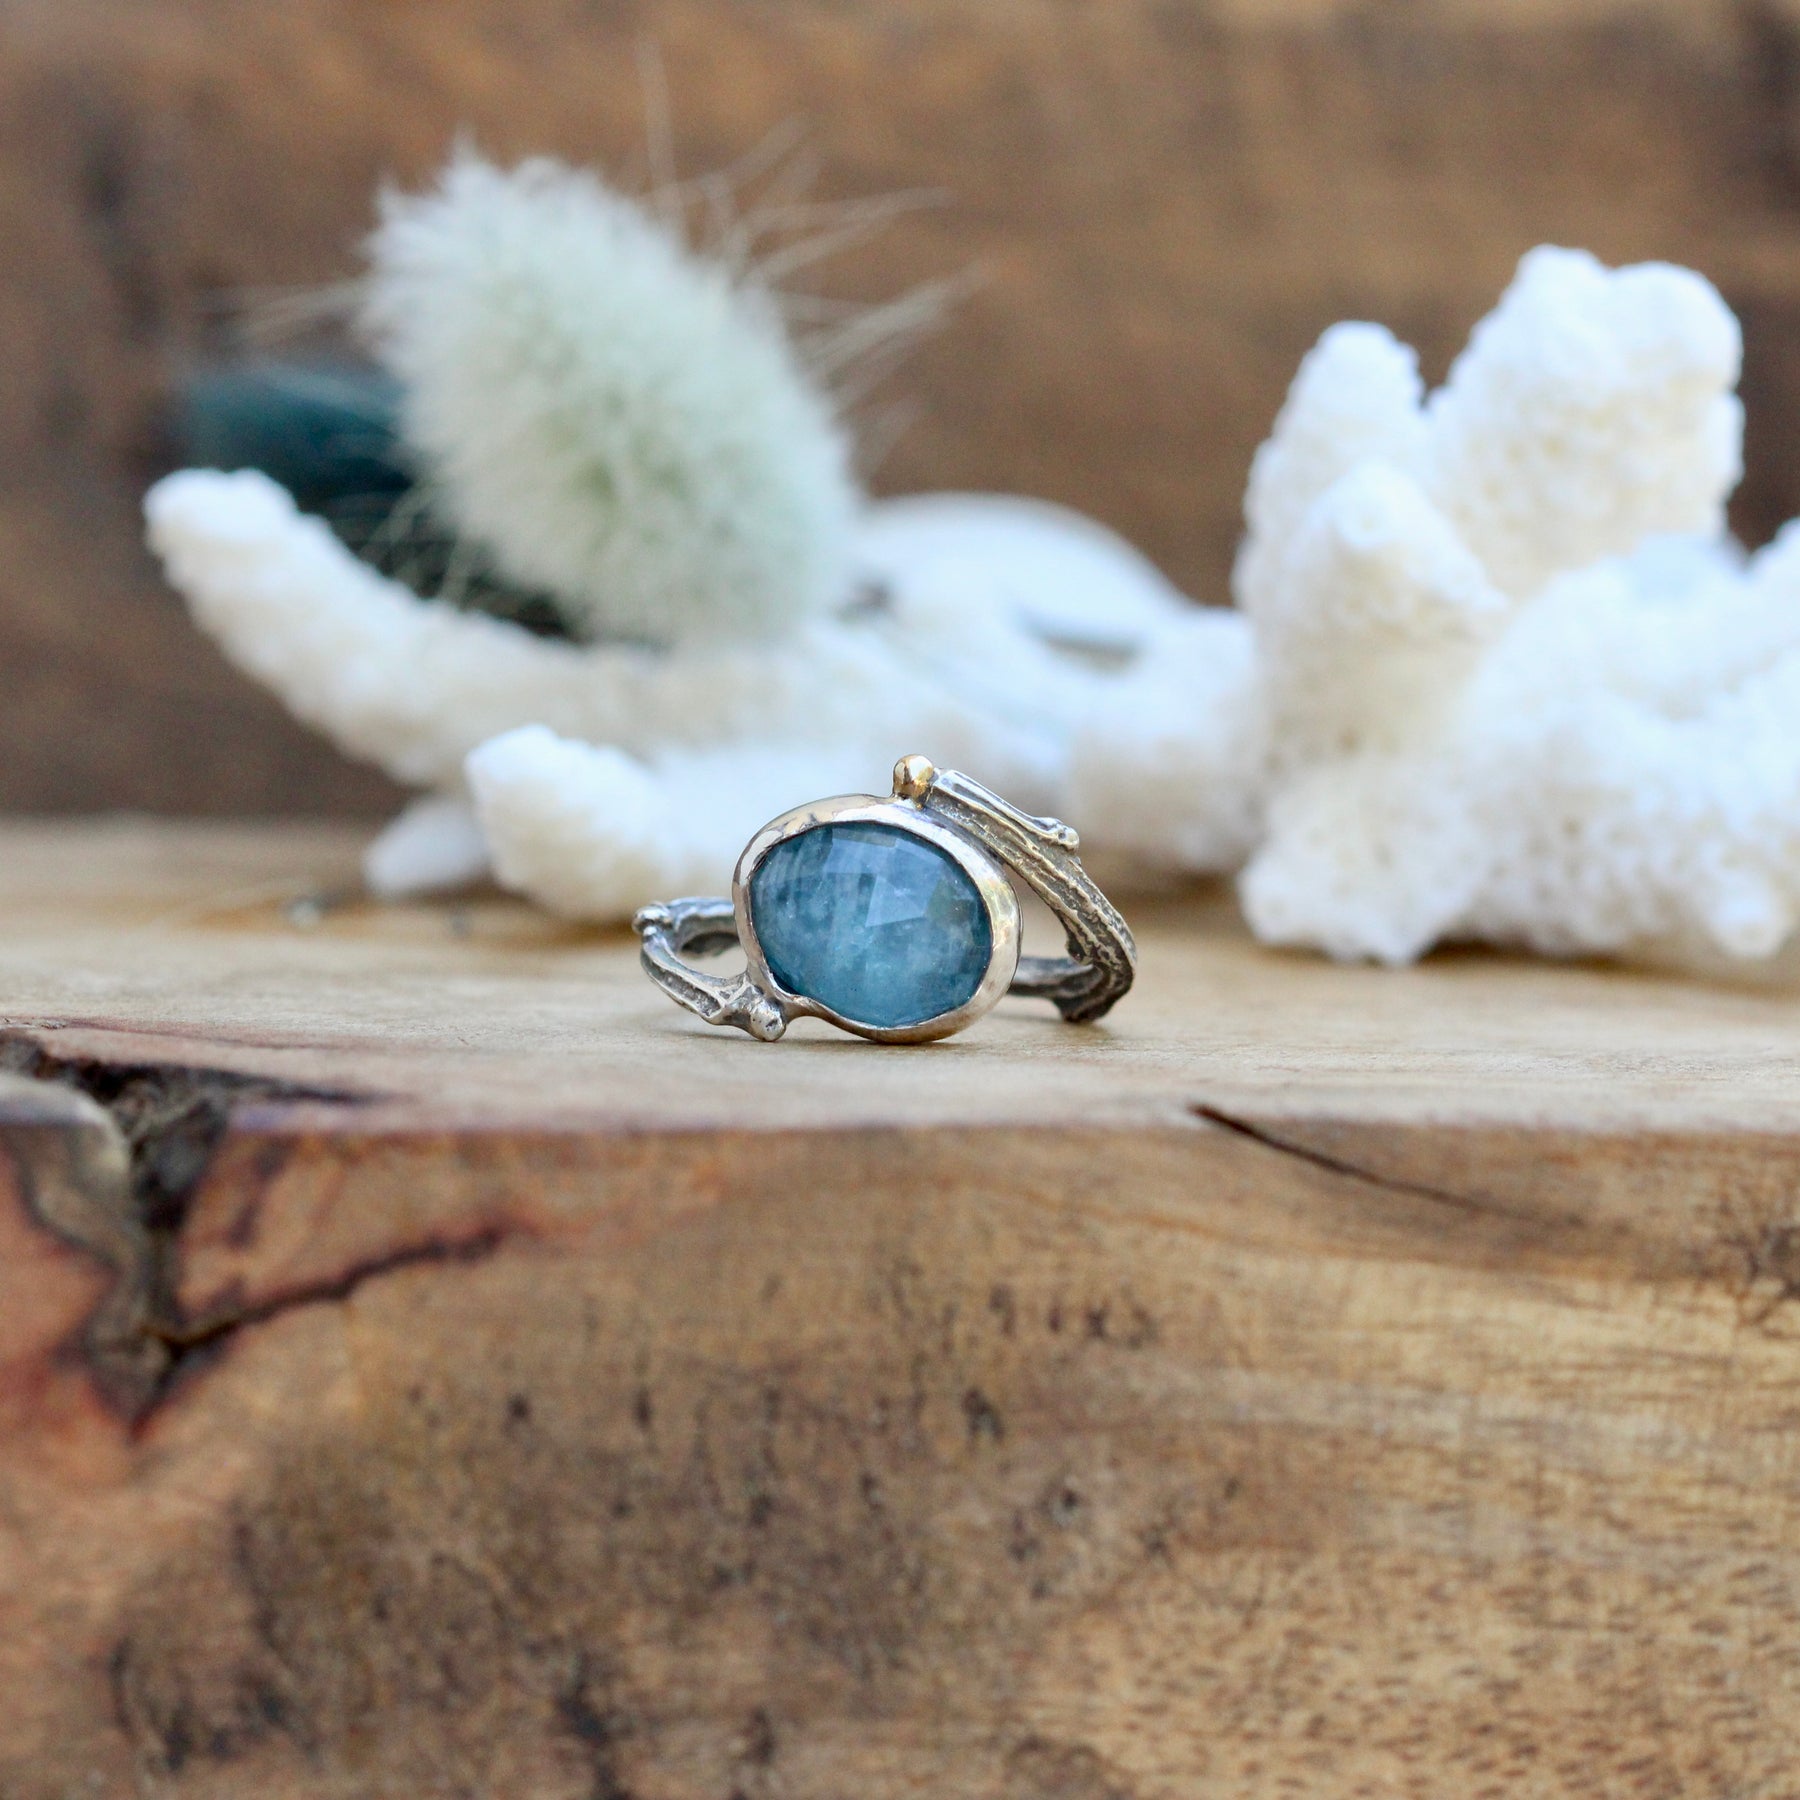 Aquamarine and sterling silver branch ring with 14k gold accent